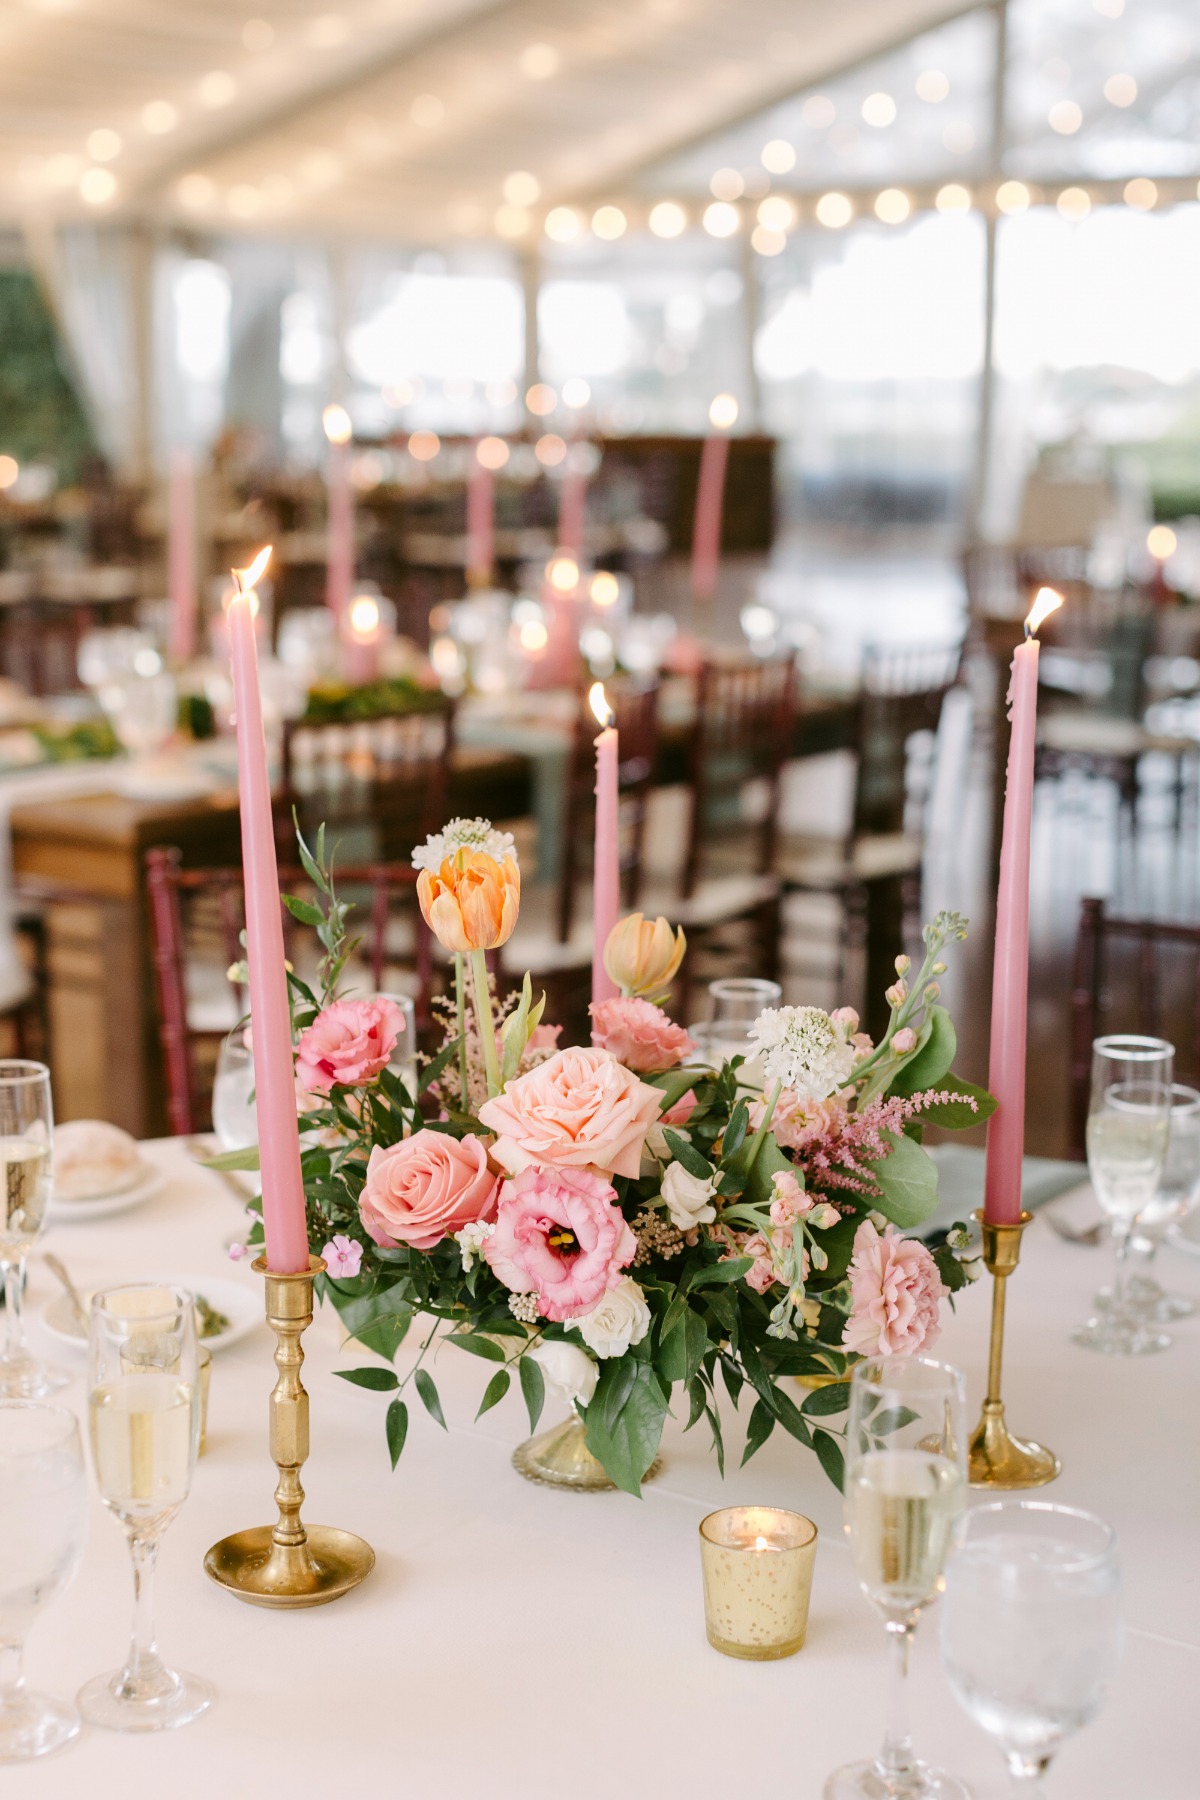 Reception table centerpiece with pink candles